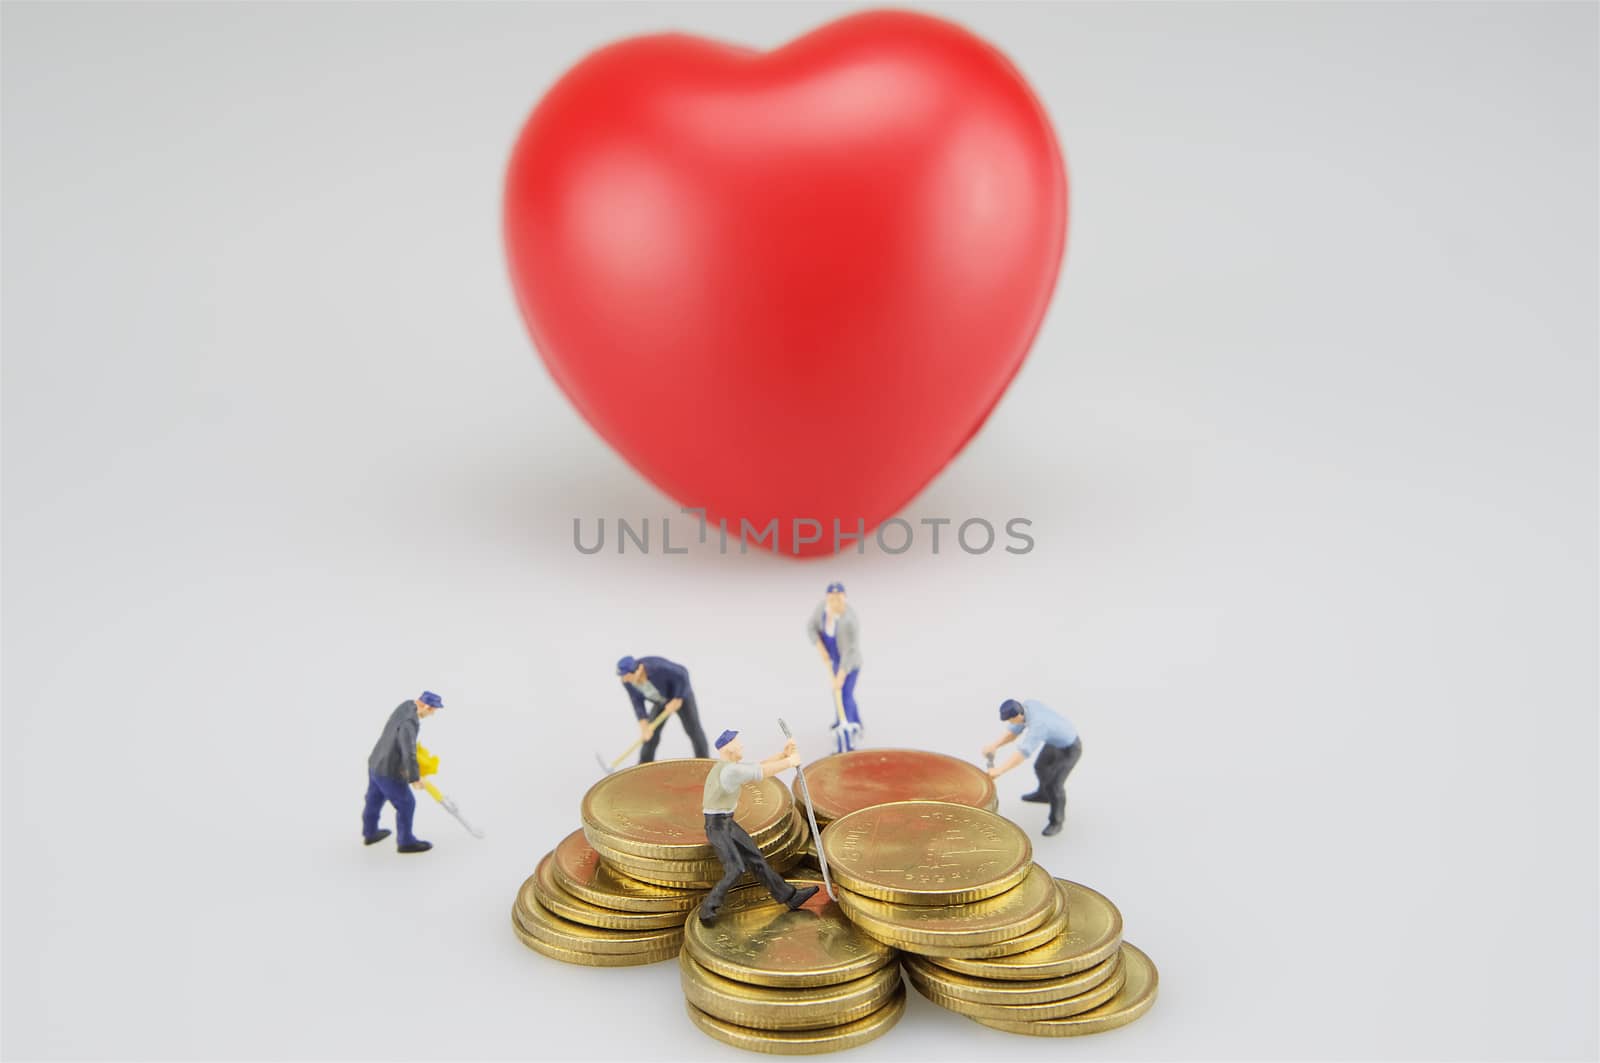 Coin stacks with miniature and blur red heart on white background.